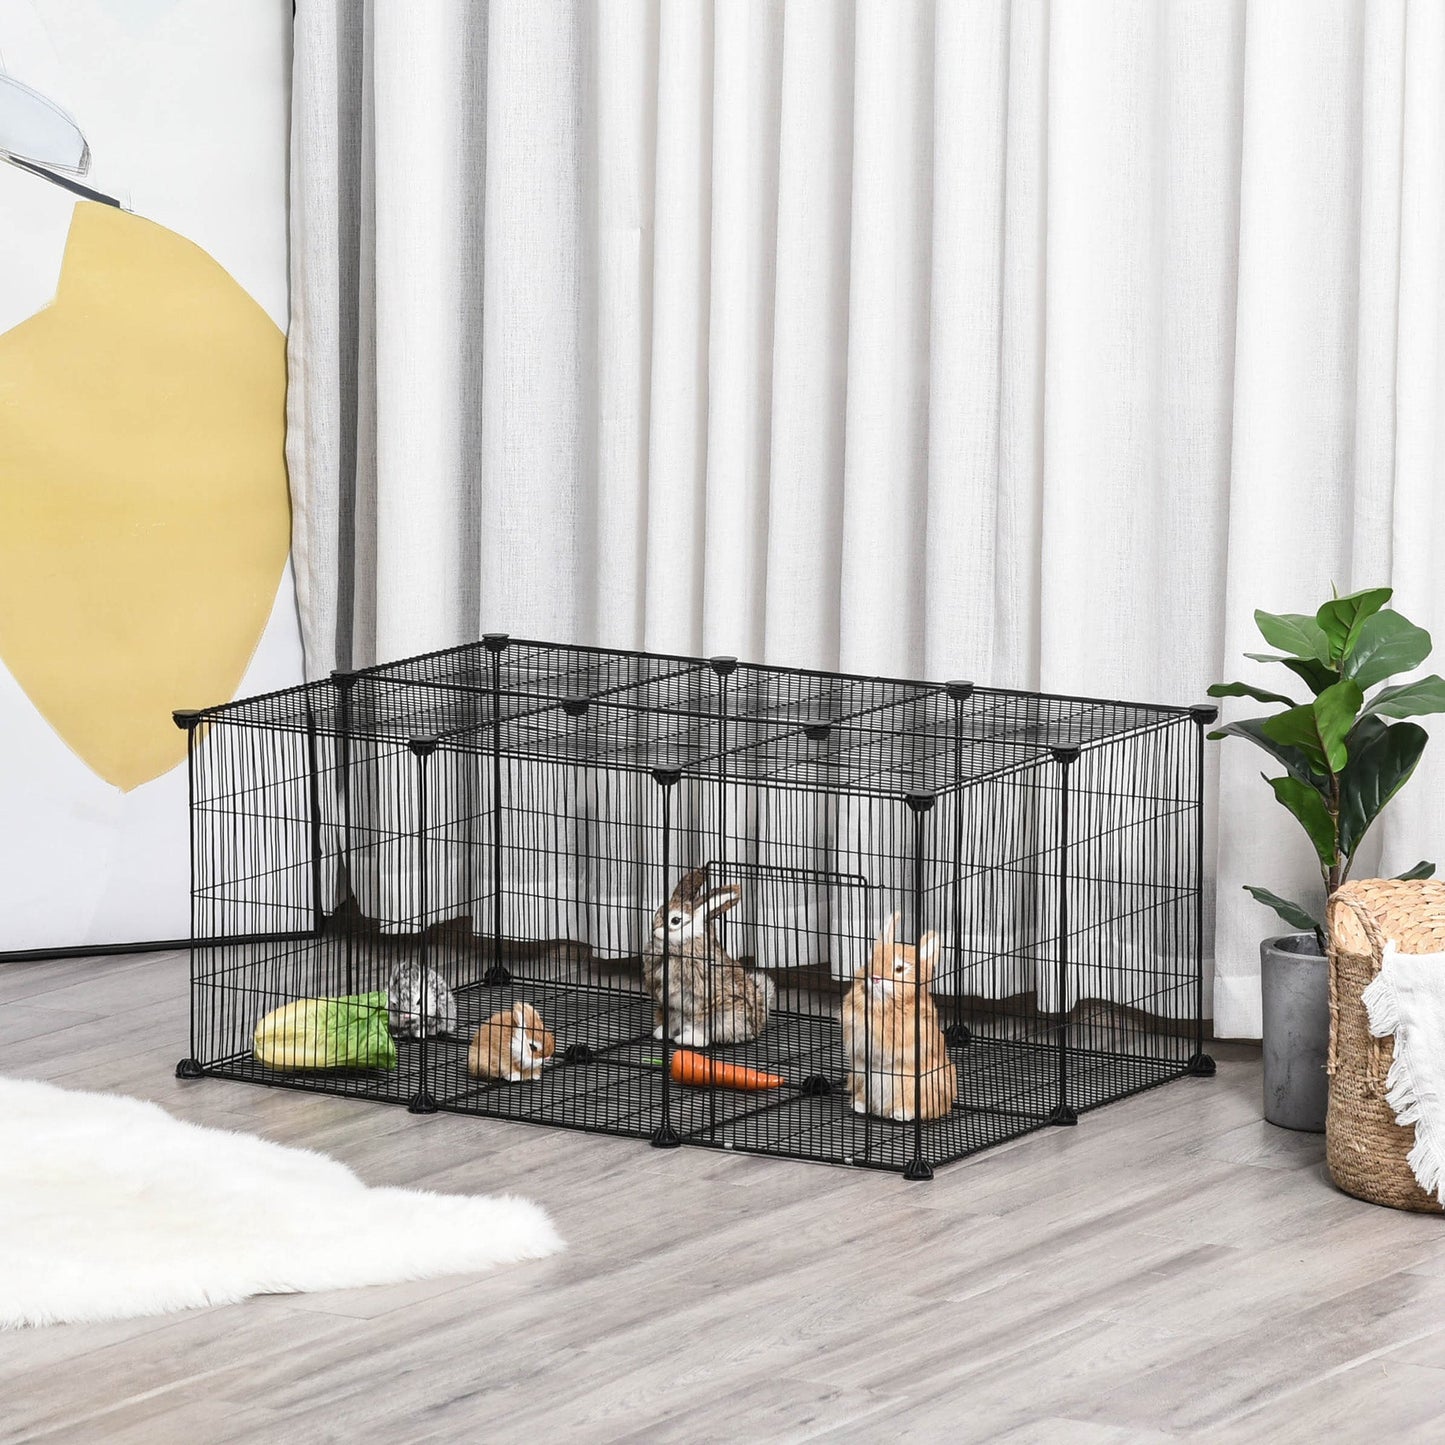 Small Animal Cage for Bunny, Guinea Pig, Chinchilla, Hedgehog, Portable Pet Enclosure with Door, 22 Panels at Gallery Canada